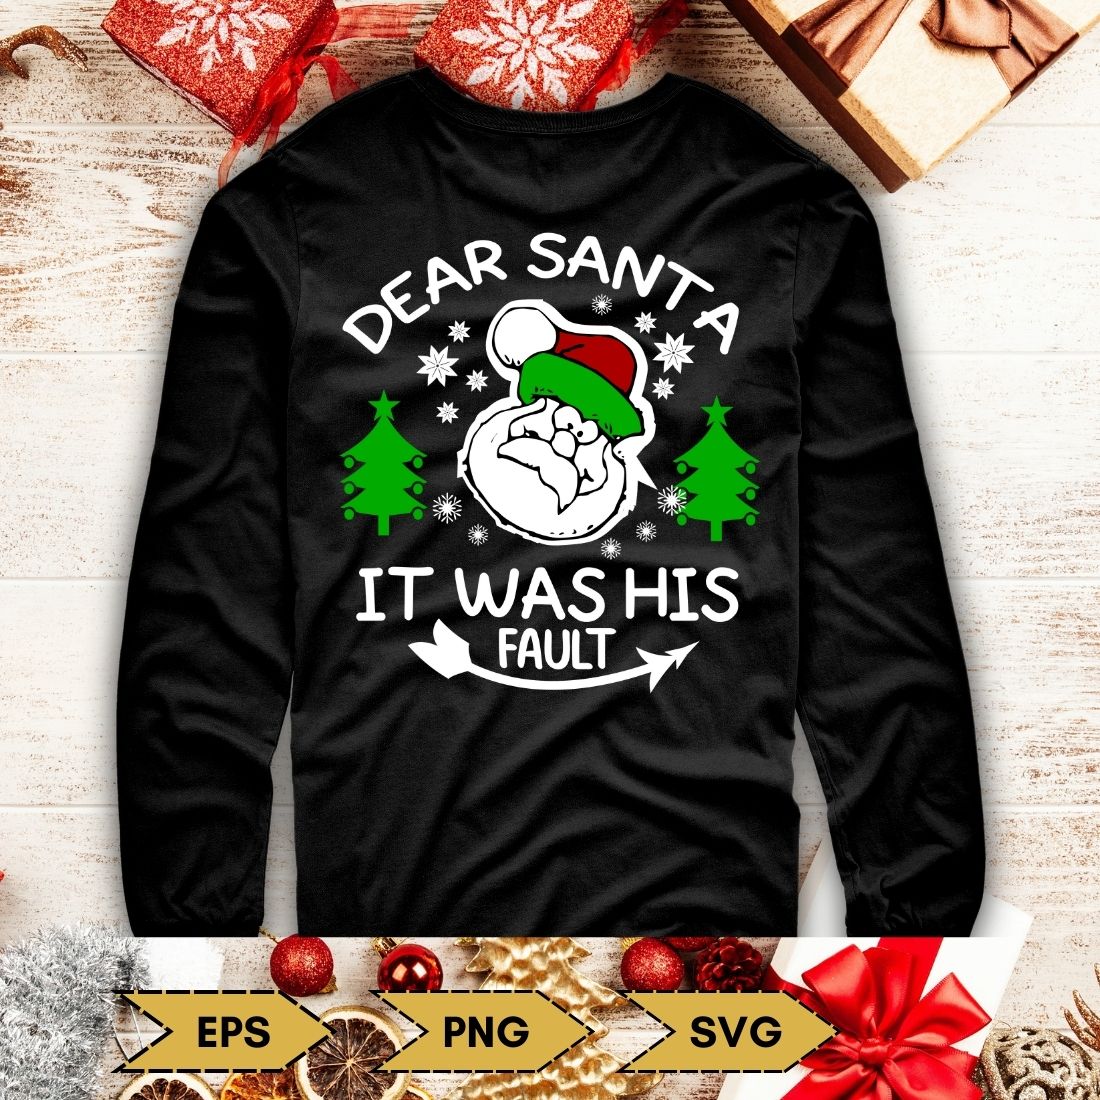 Image of a black sweatshirt with an irresistible print on the Christmas theme.